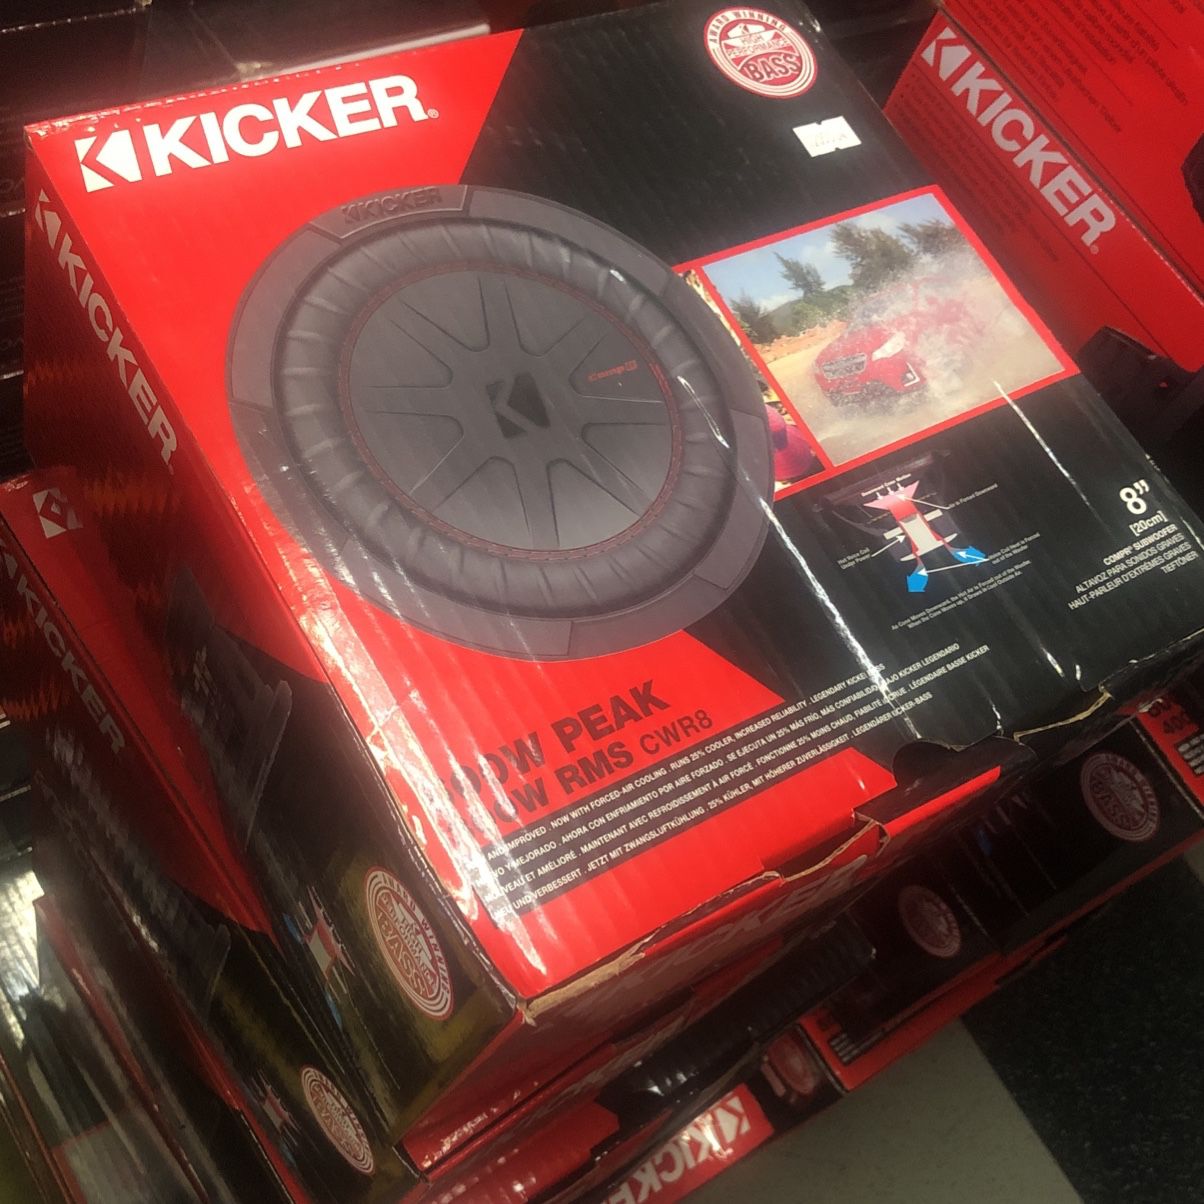 Kicker CompR 8 On Sale Today For 89.99